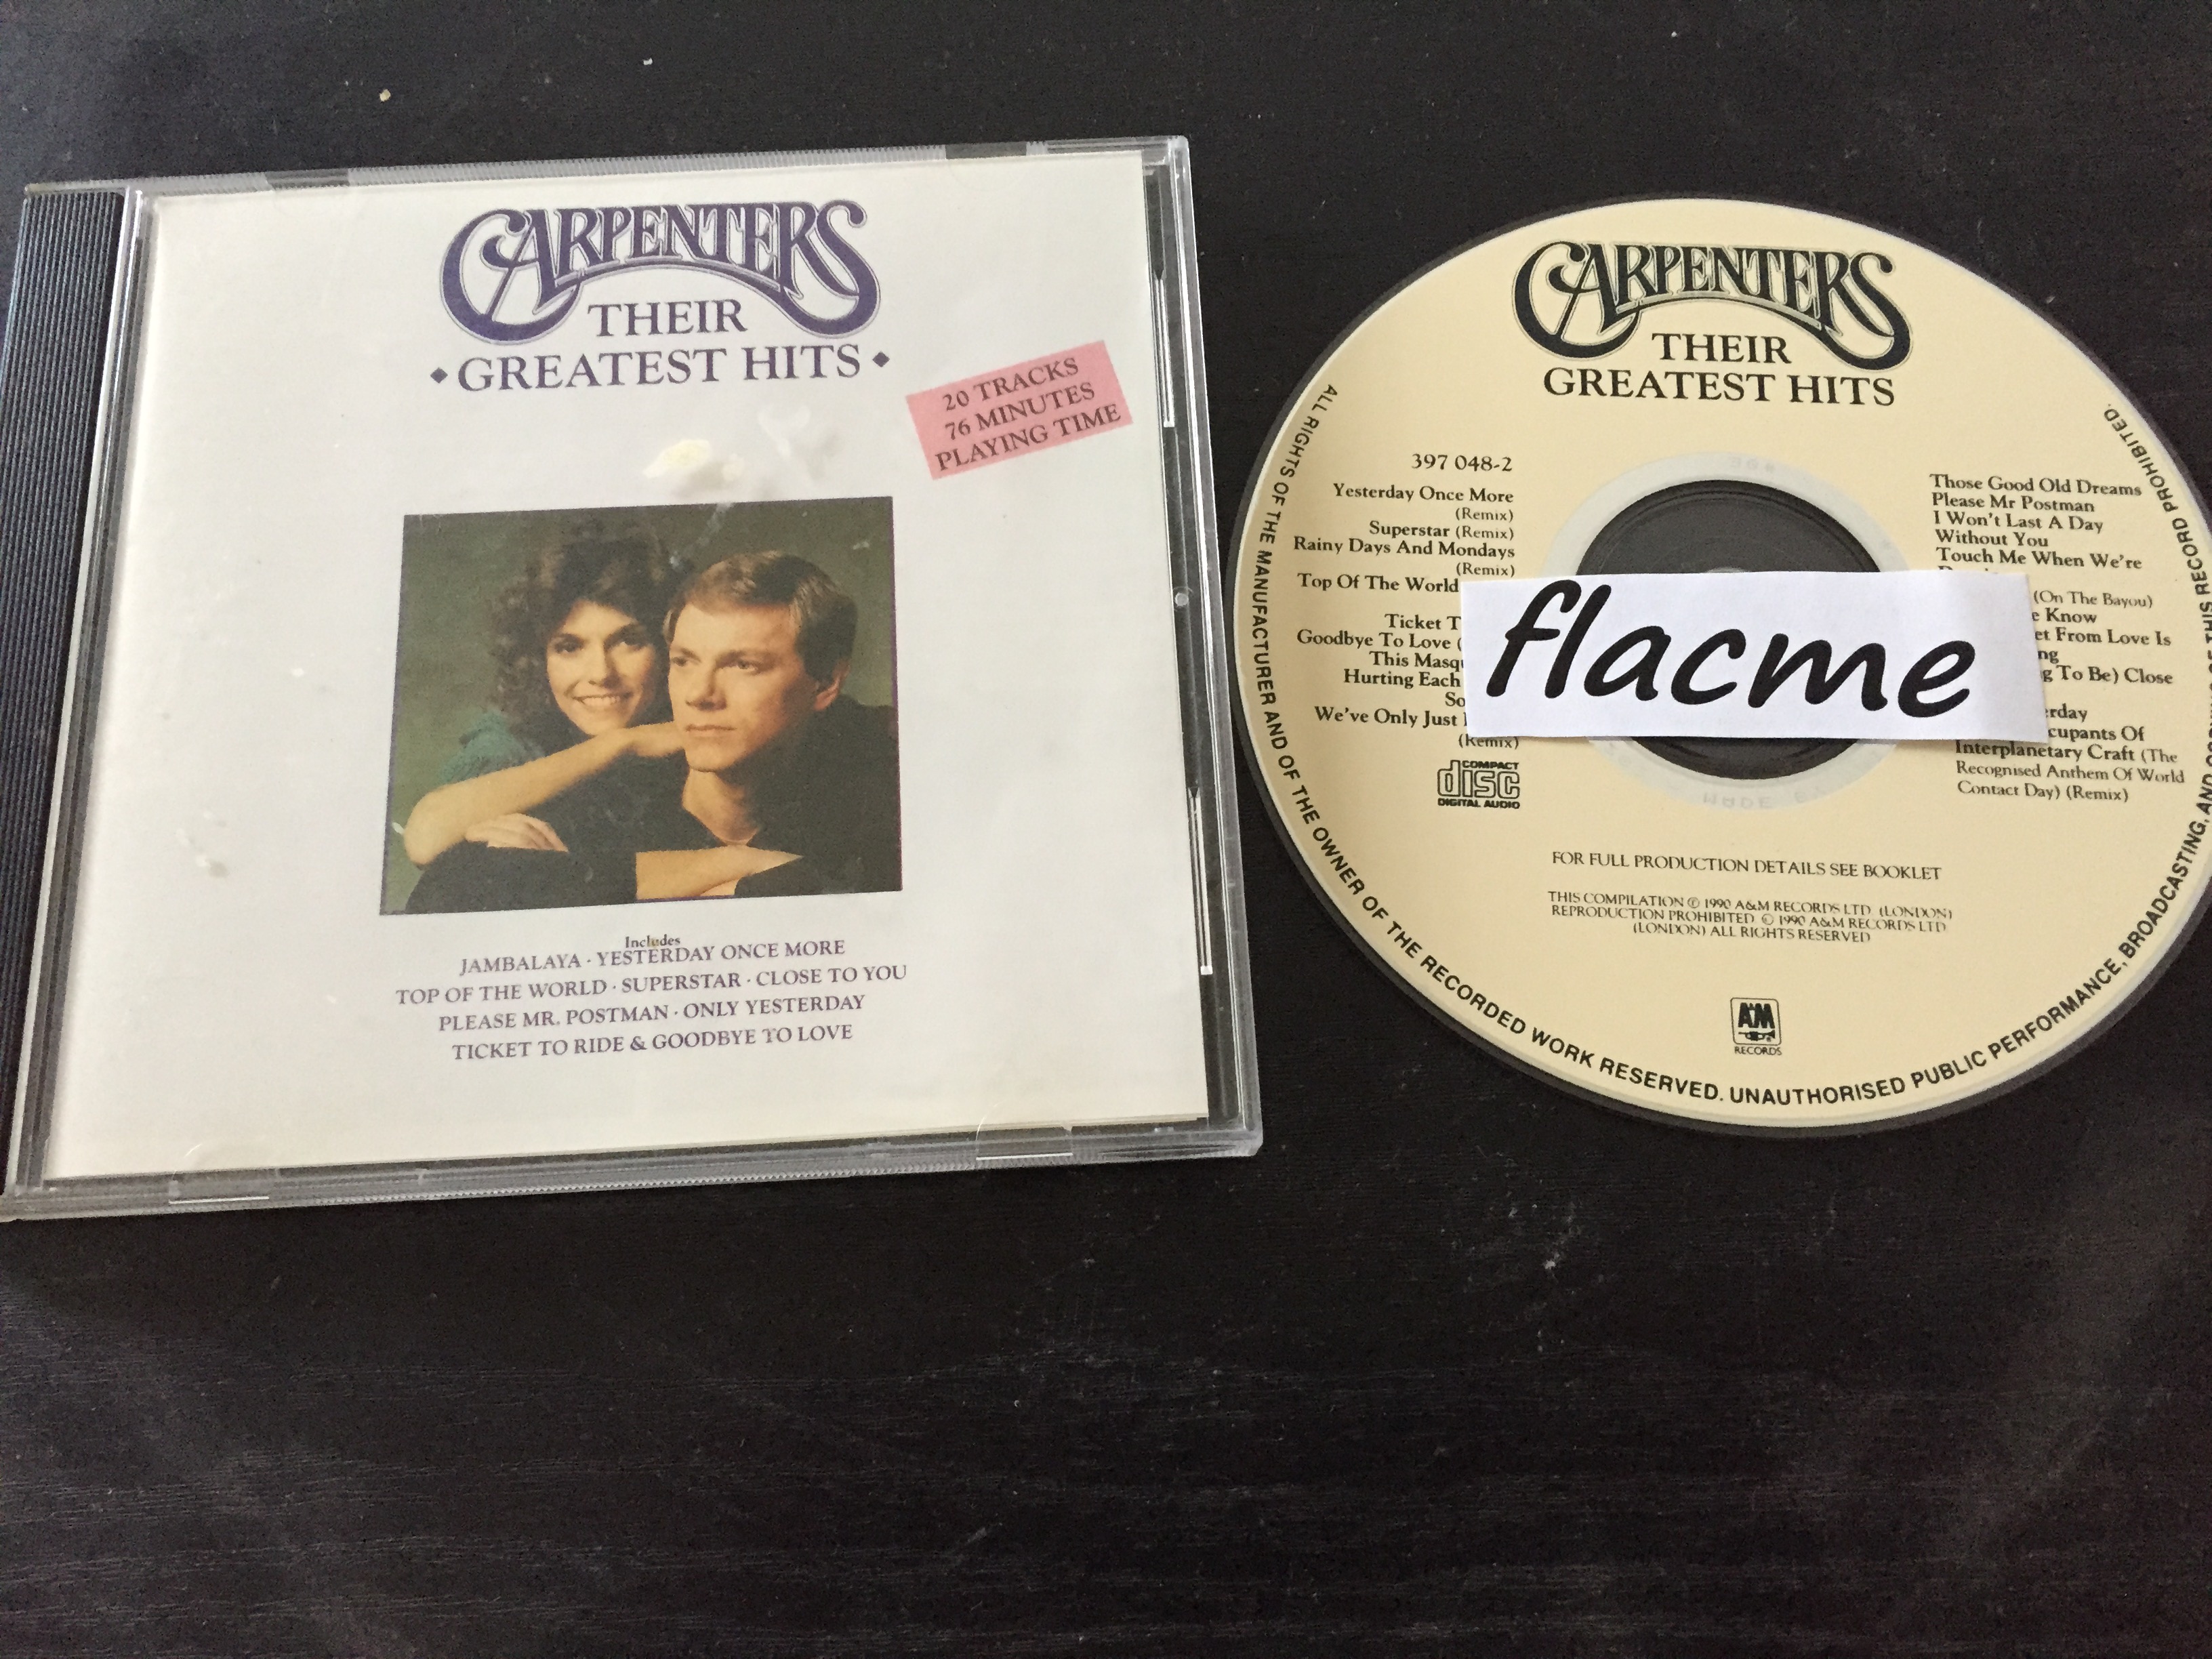 00-carpenters-their_greatest_hits-cd-flac-1990-proof.jpg